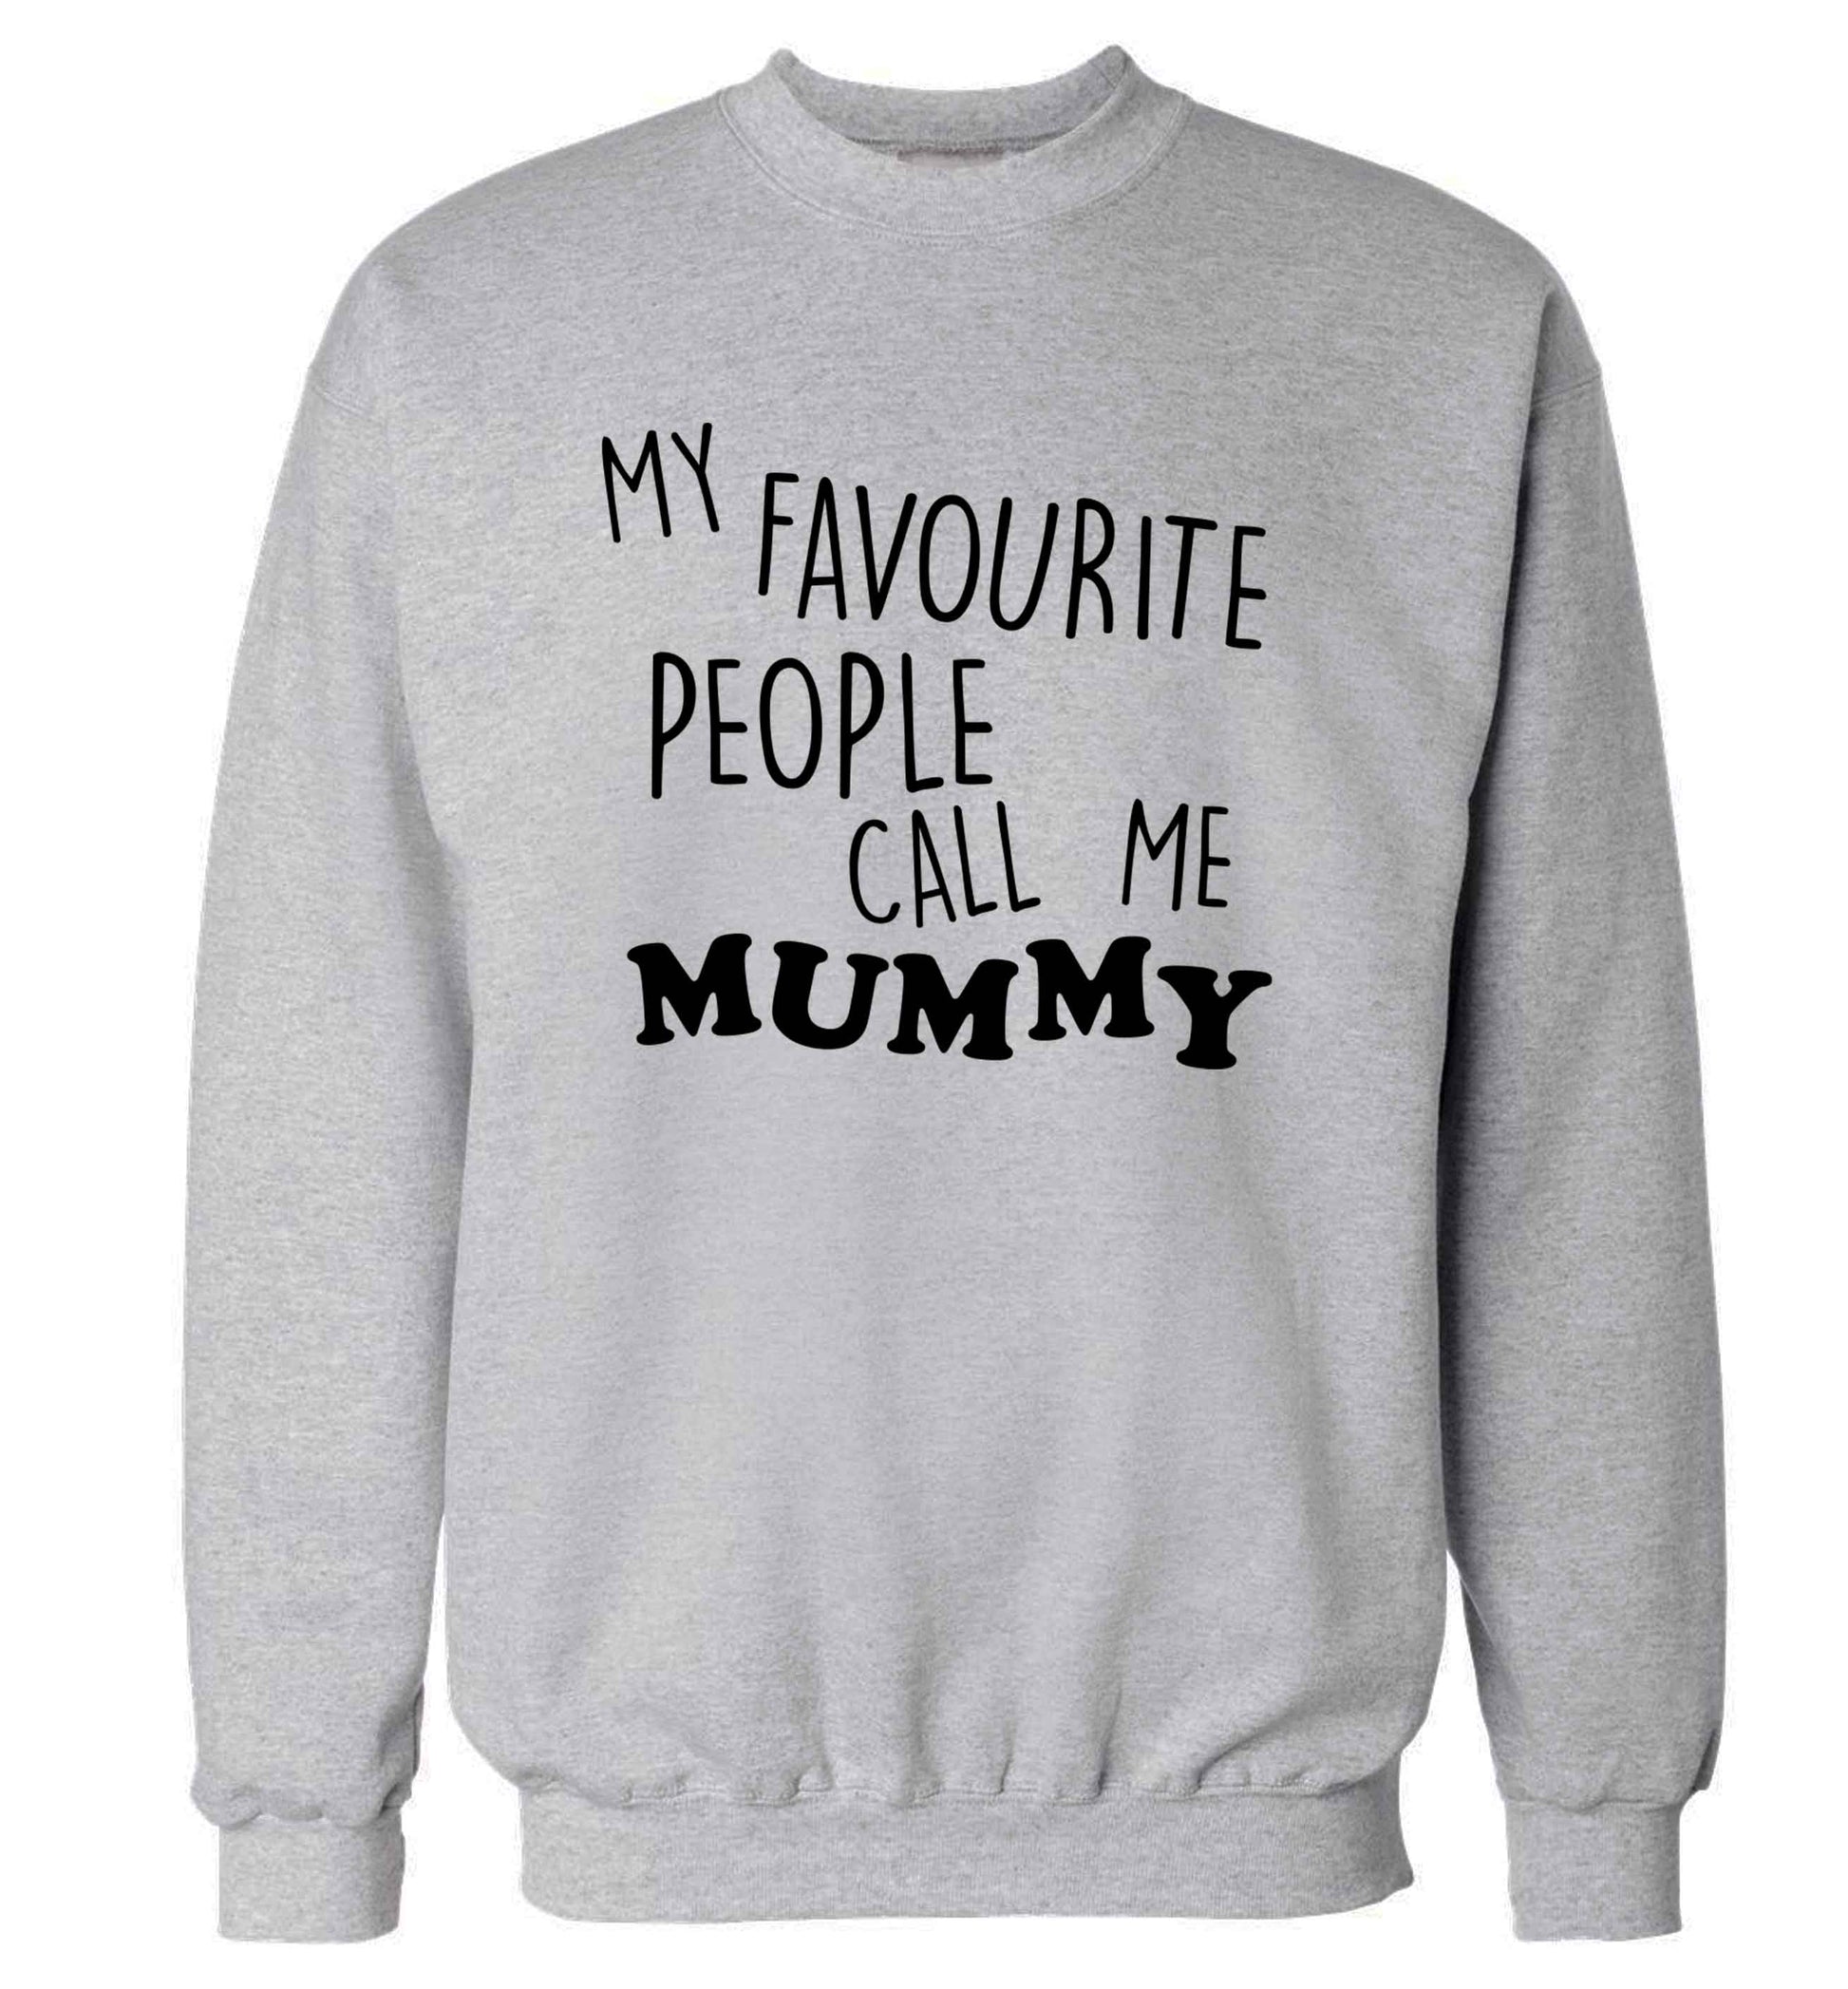 My favourite people call me mummy adult's unisex grey sweater 2XL